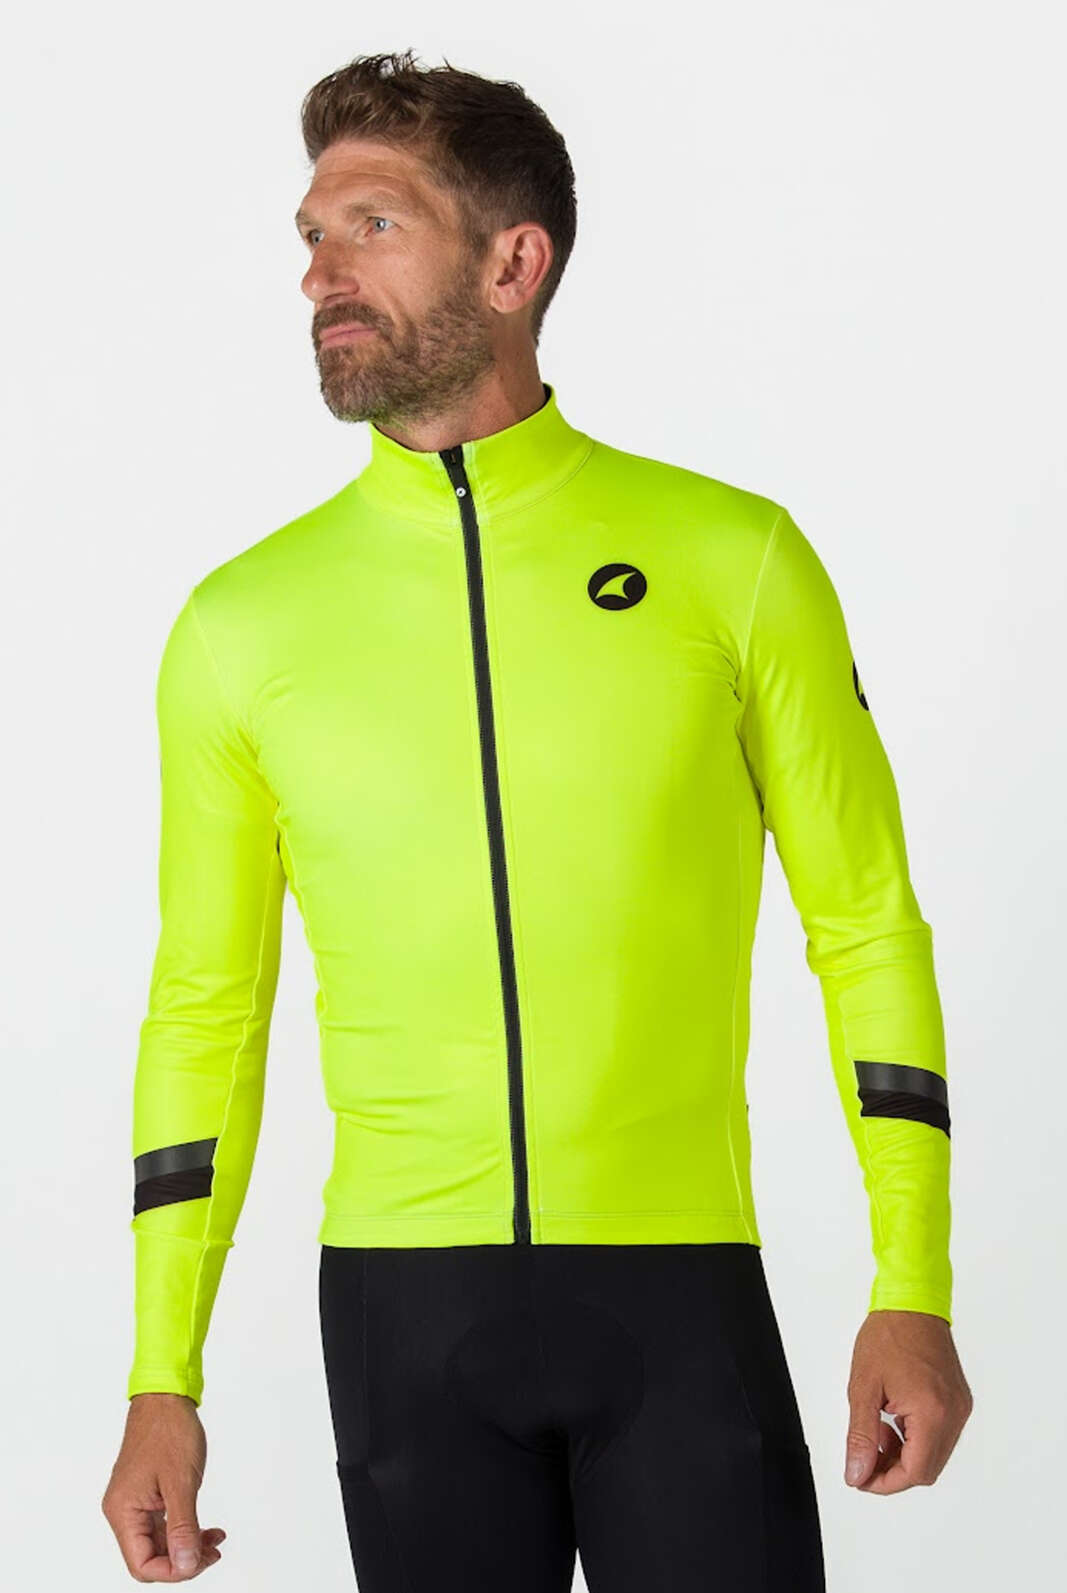 Men's High-Viz Thermal Cycling Jersey, Cool/Cold Weather